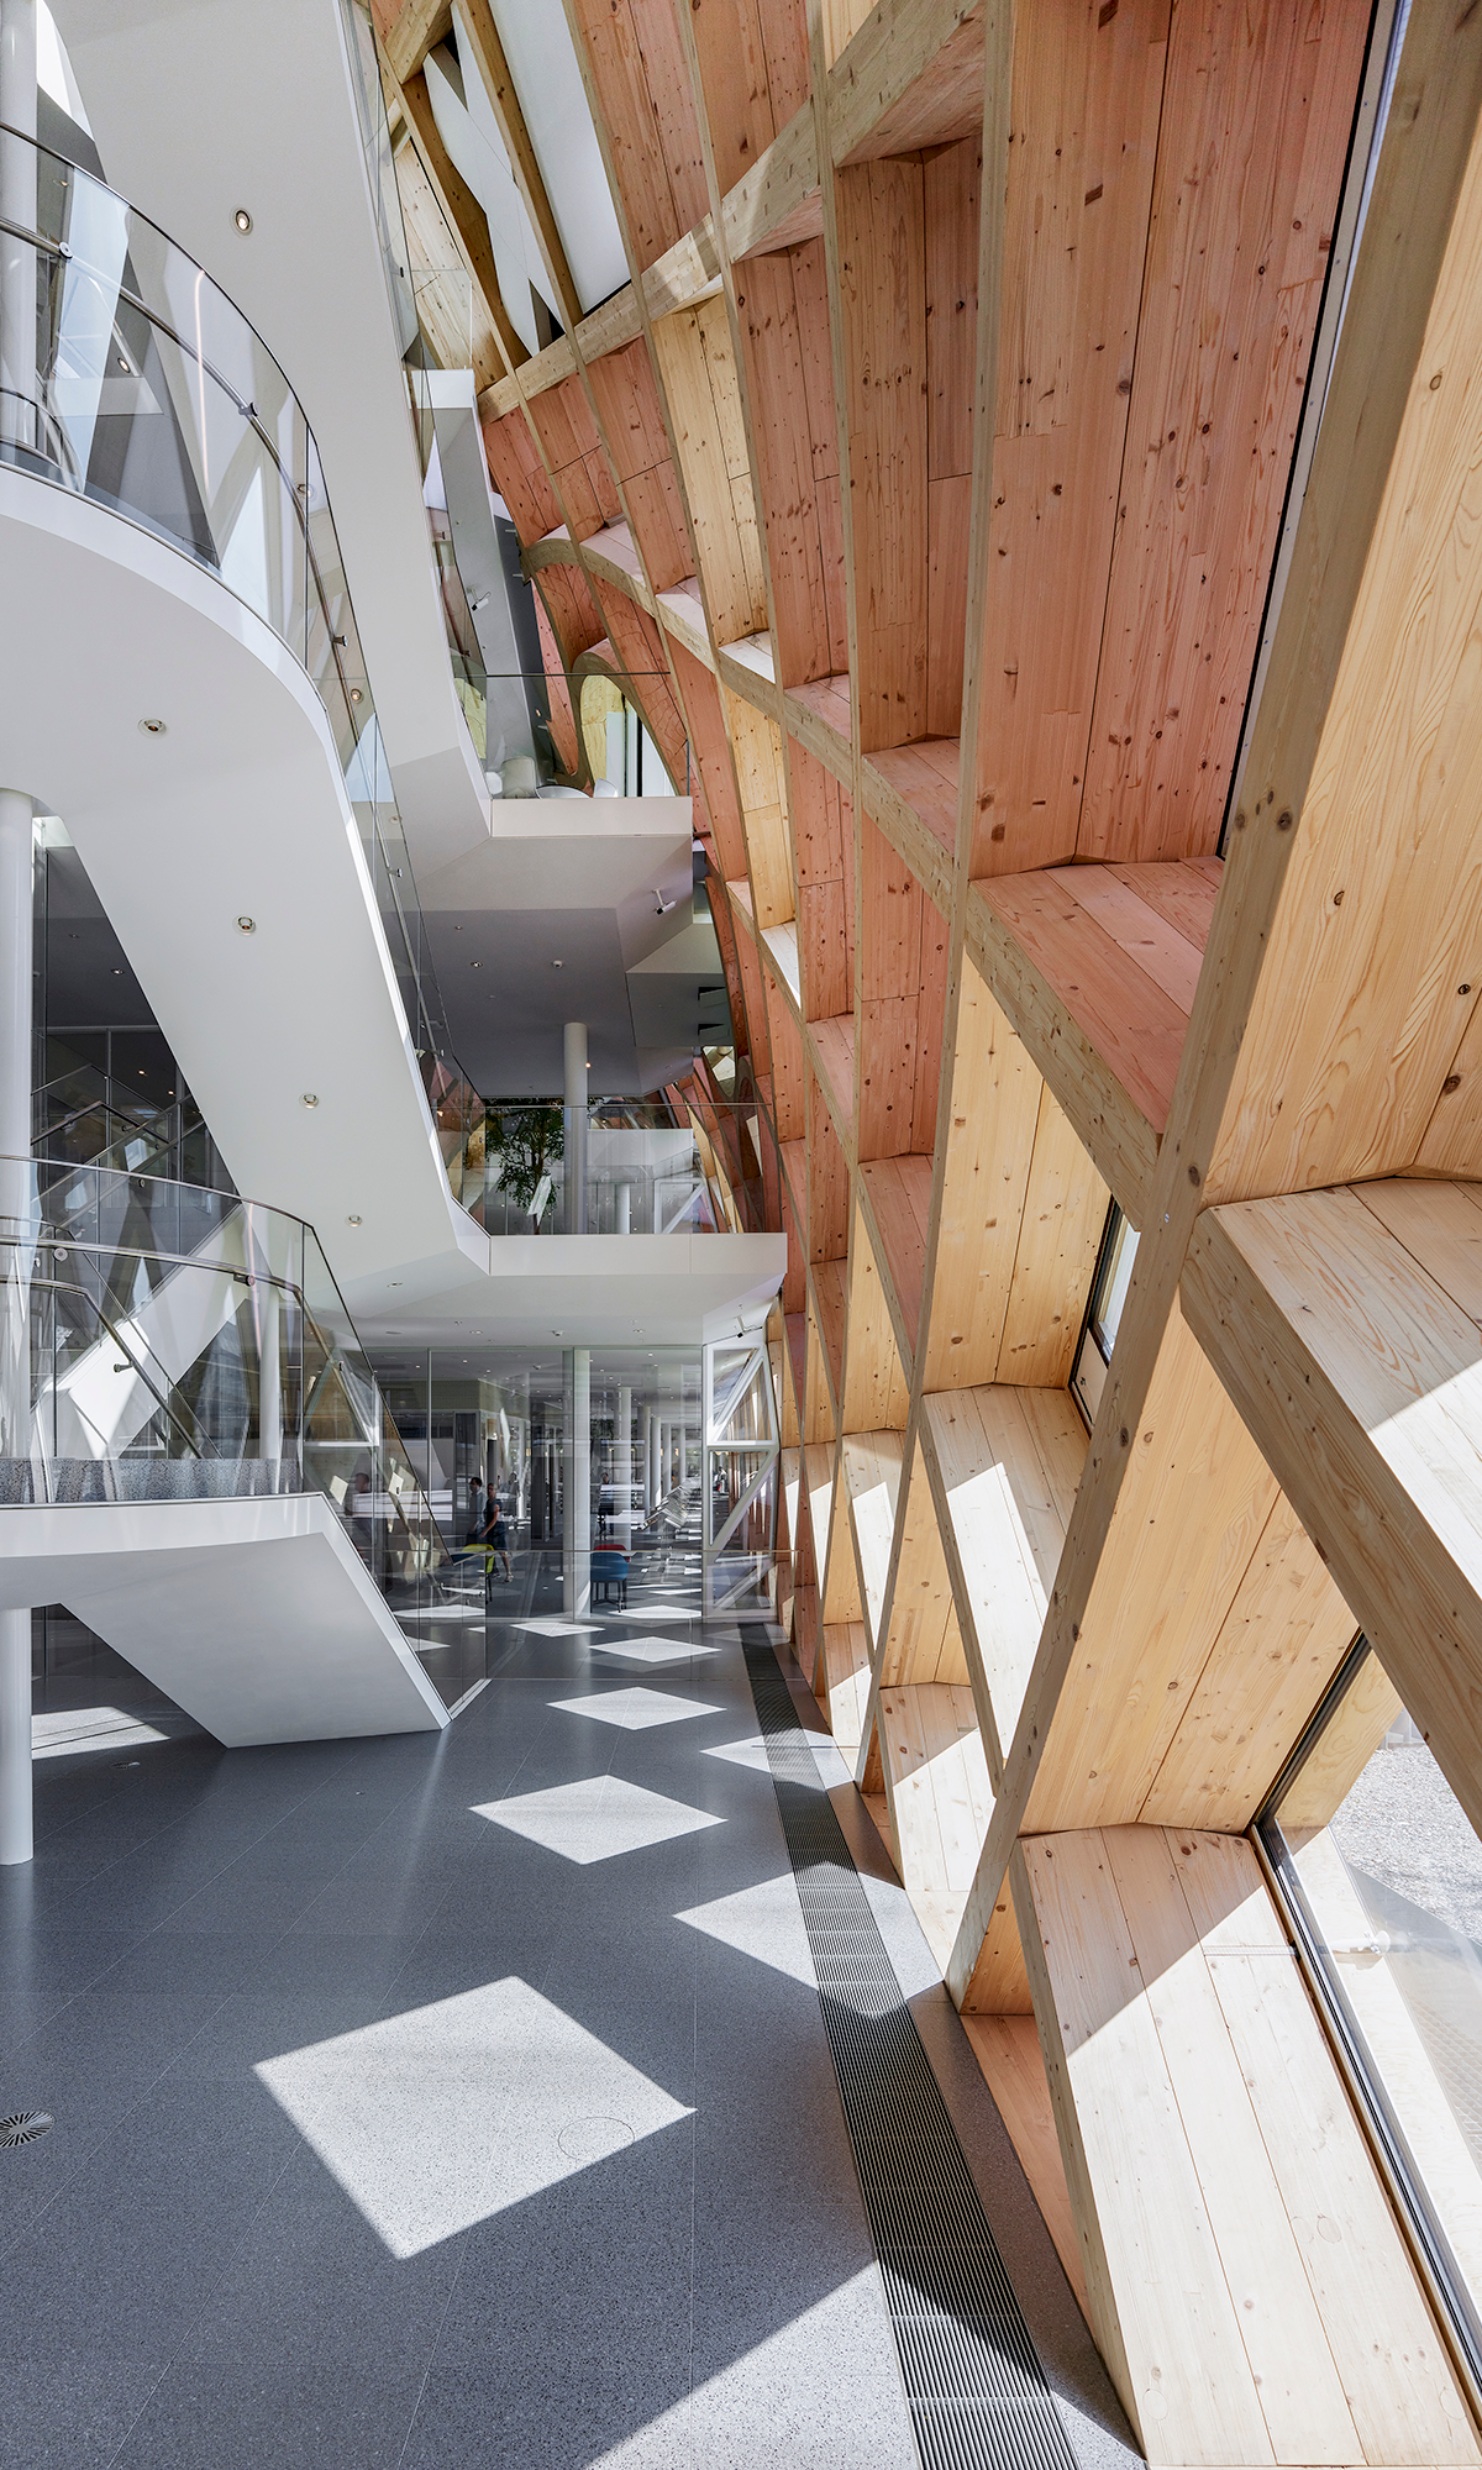 View of the unique timber substructure inside the Swatch office building